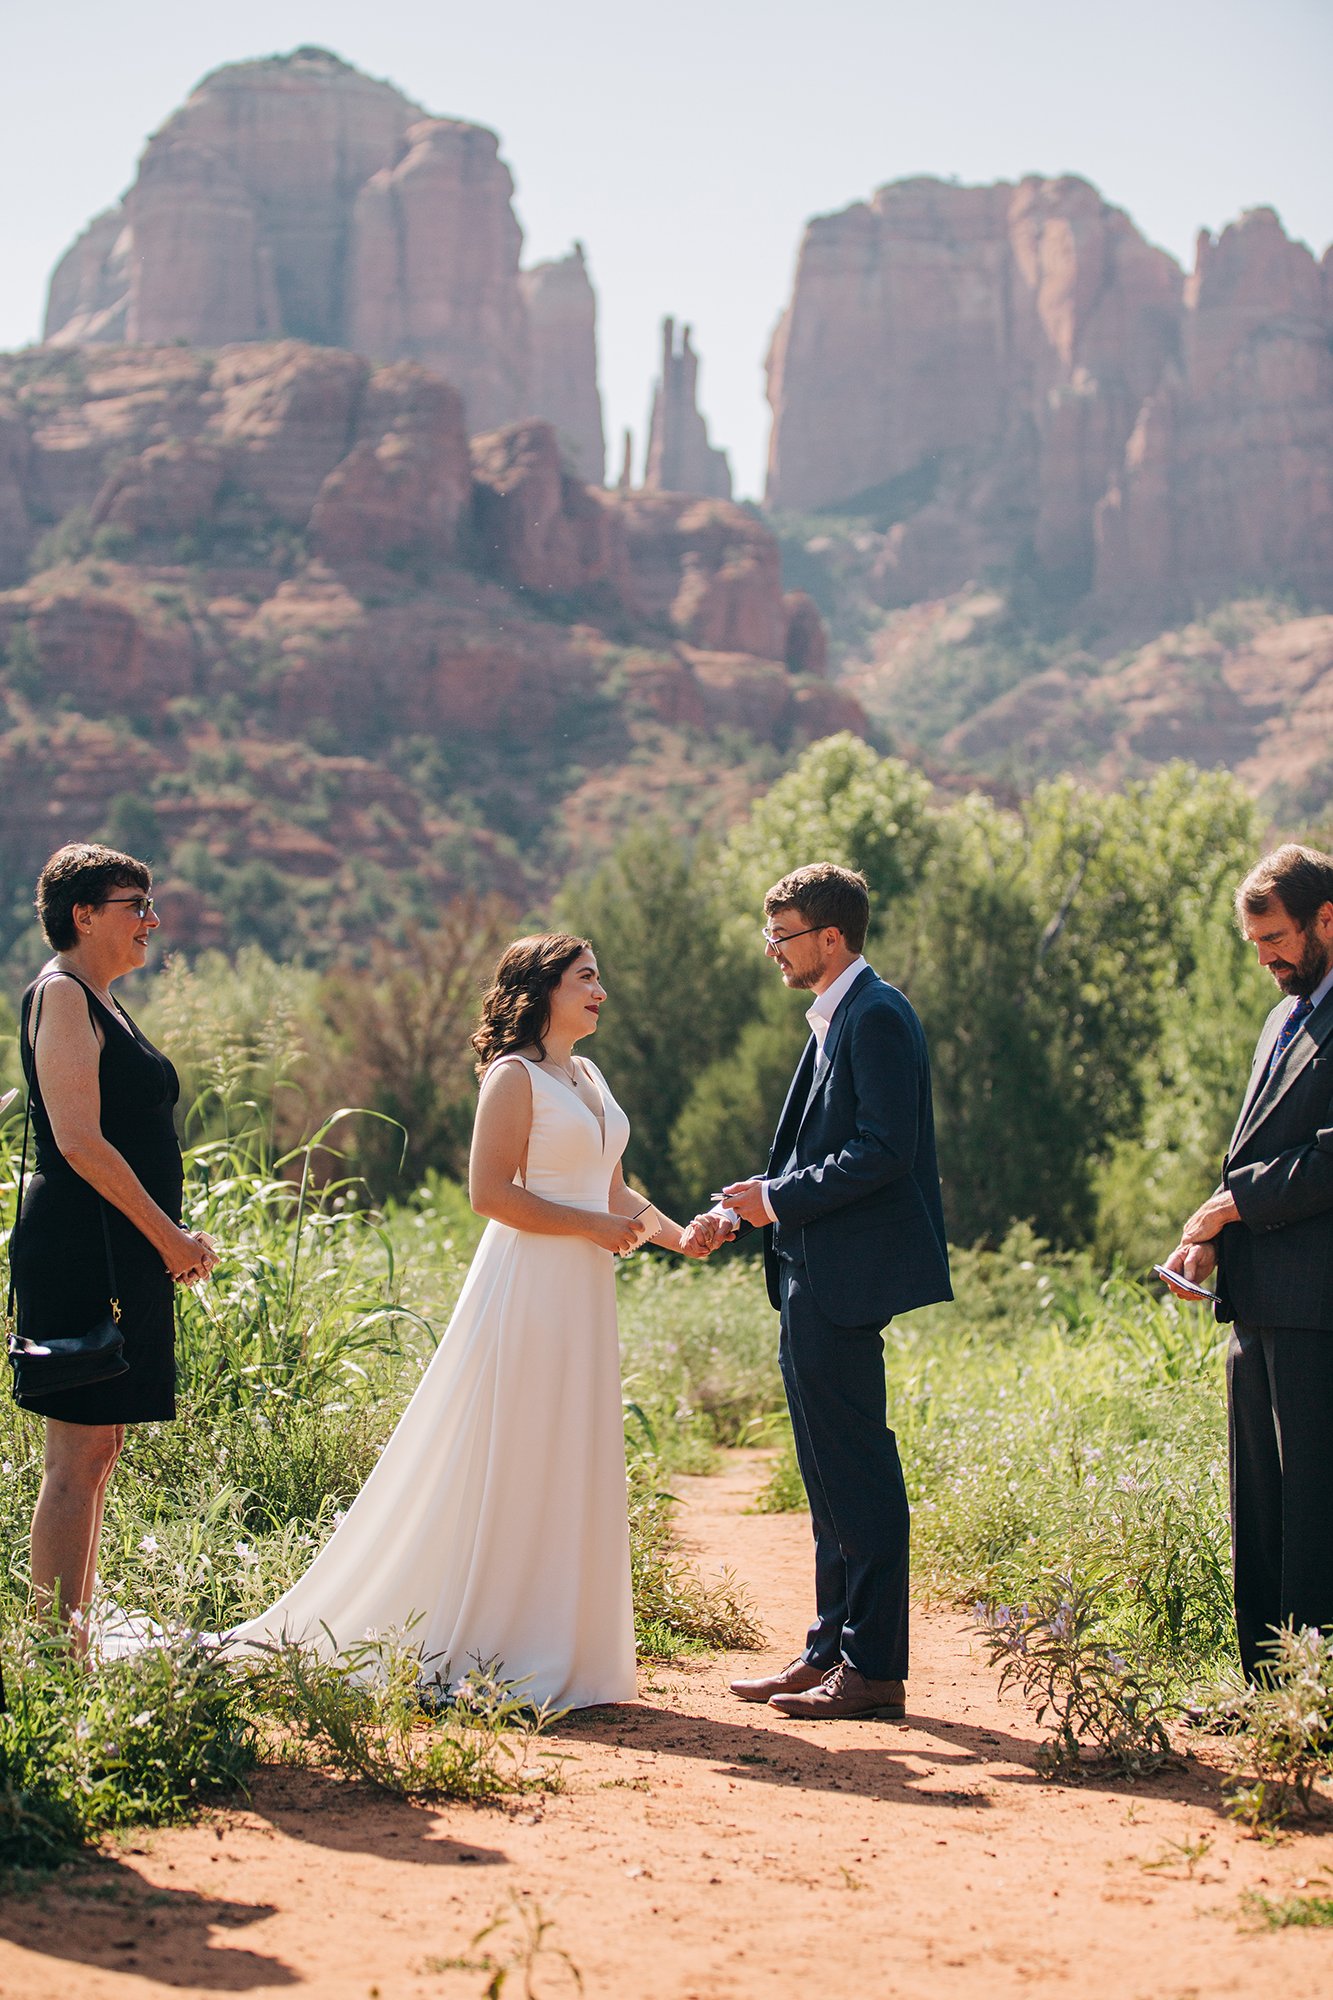 Stephanie, dressed in a long white wedding dress, looks lovingly at her groom, Matthew during this outdoor Sedona wedding